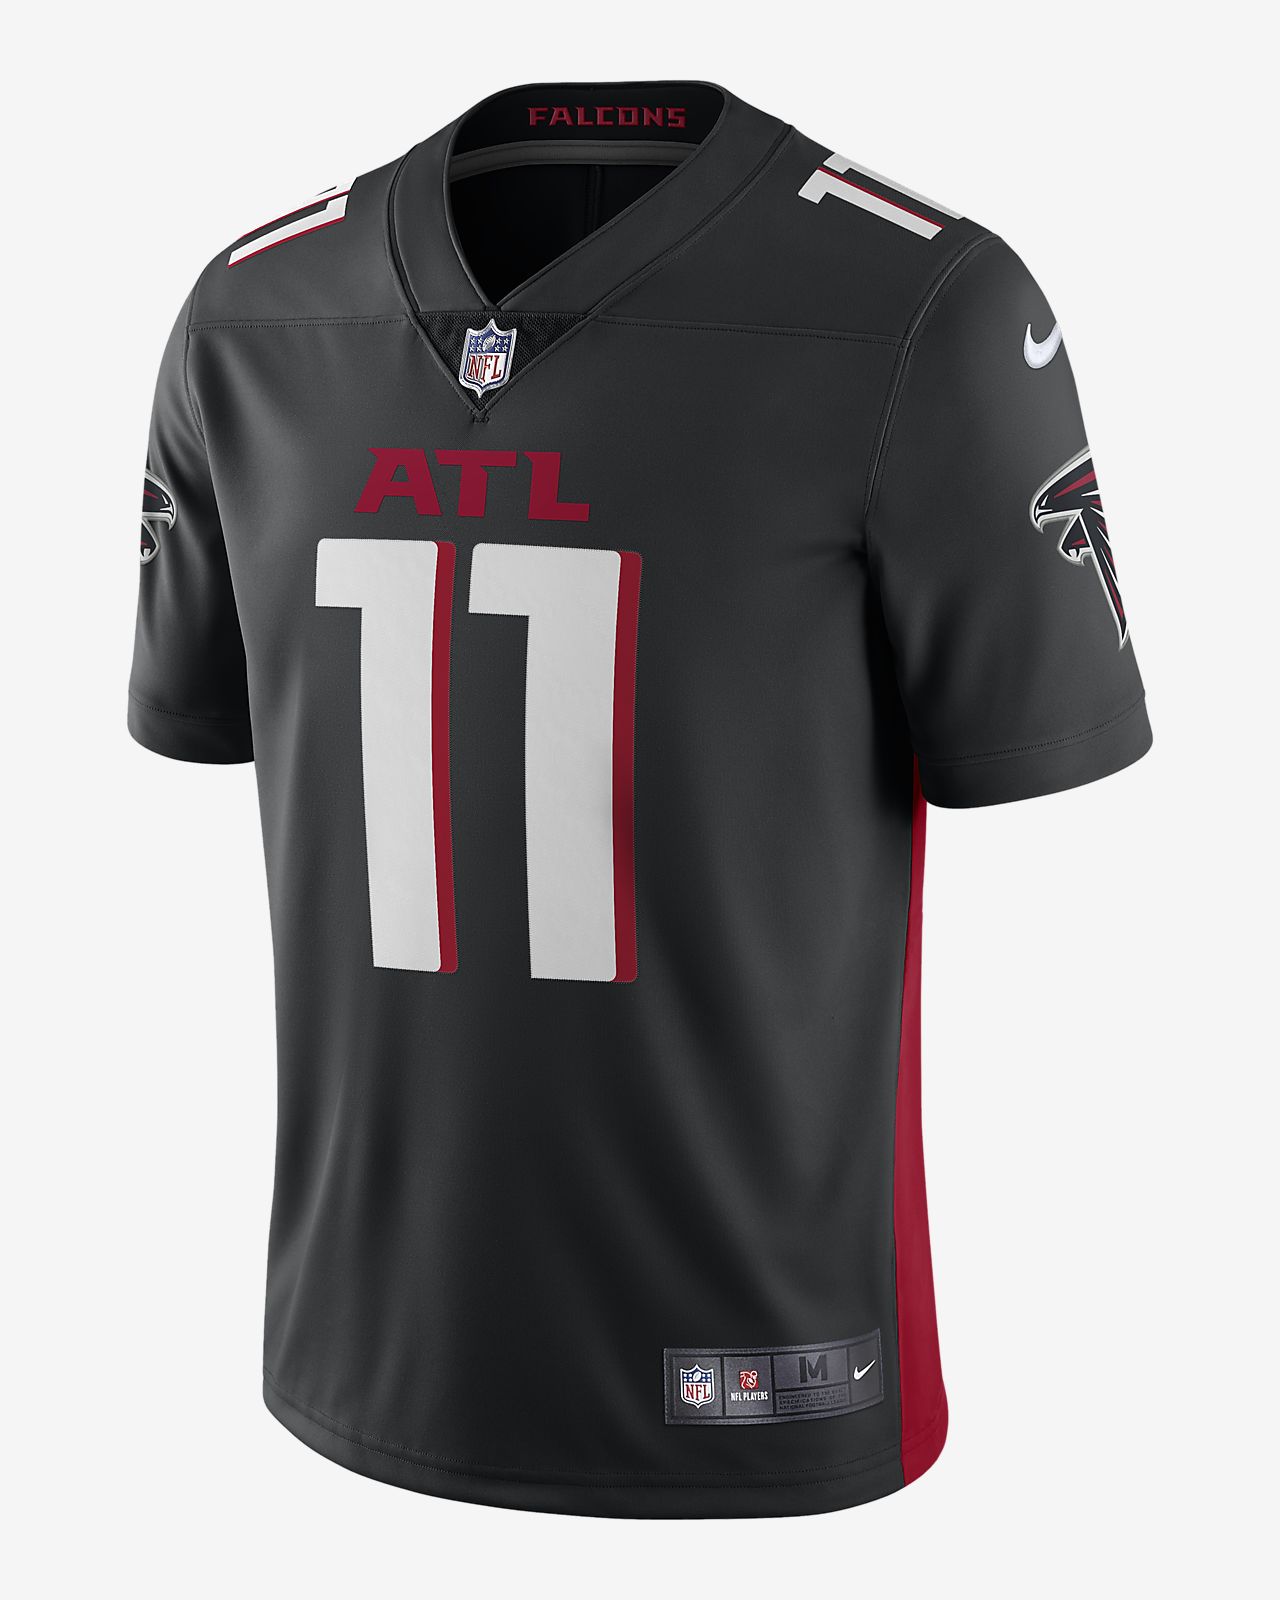 2t falcons jersey